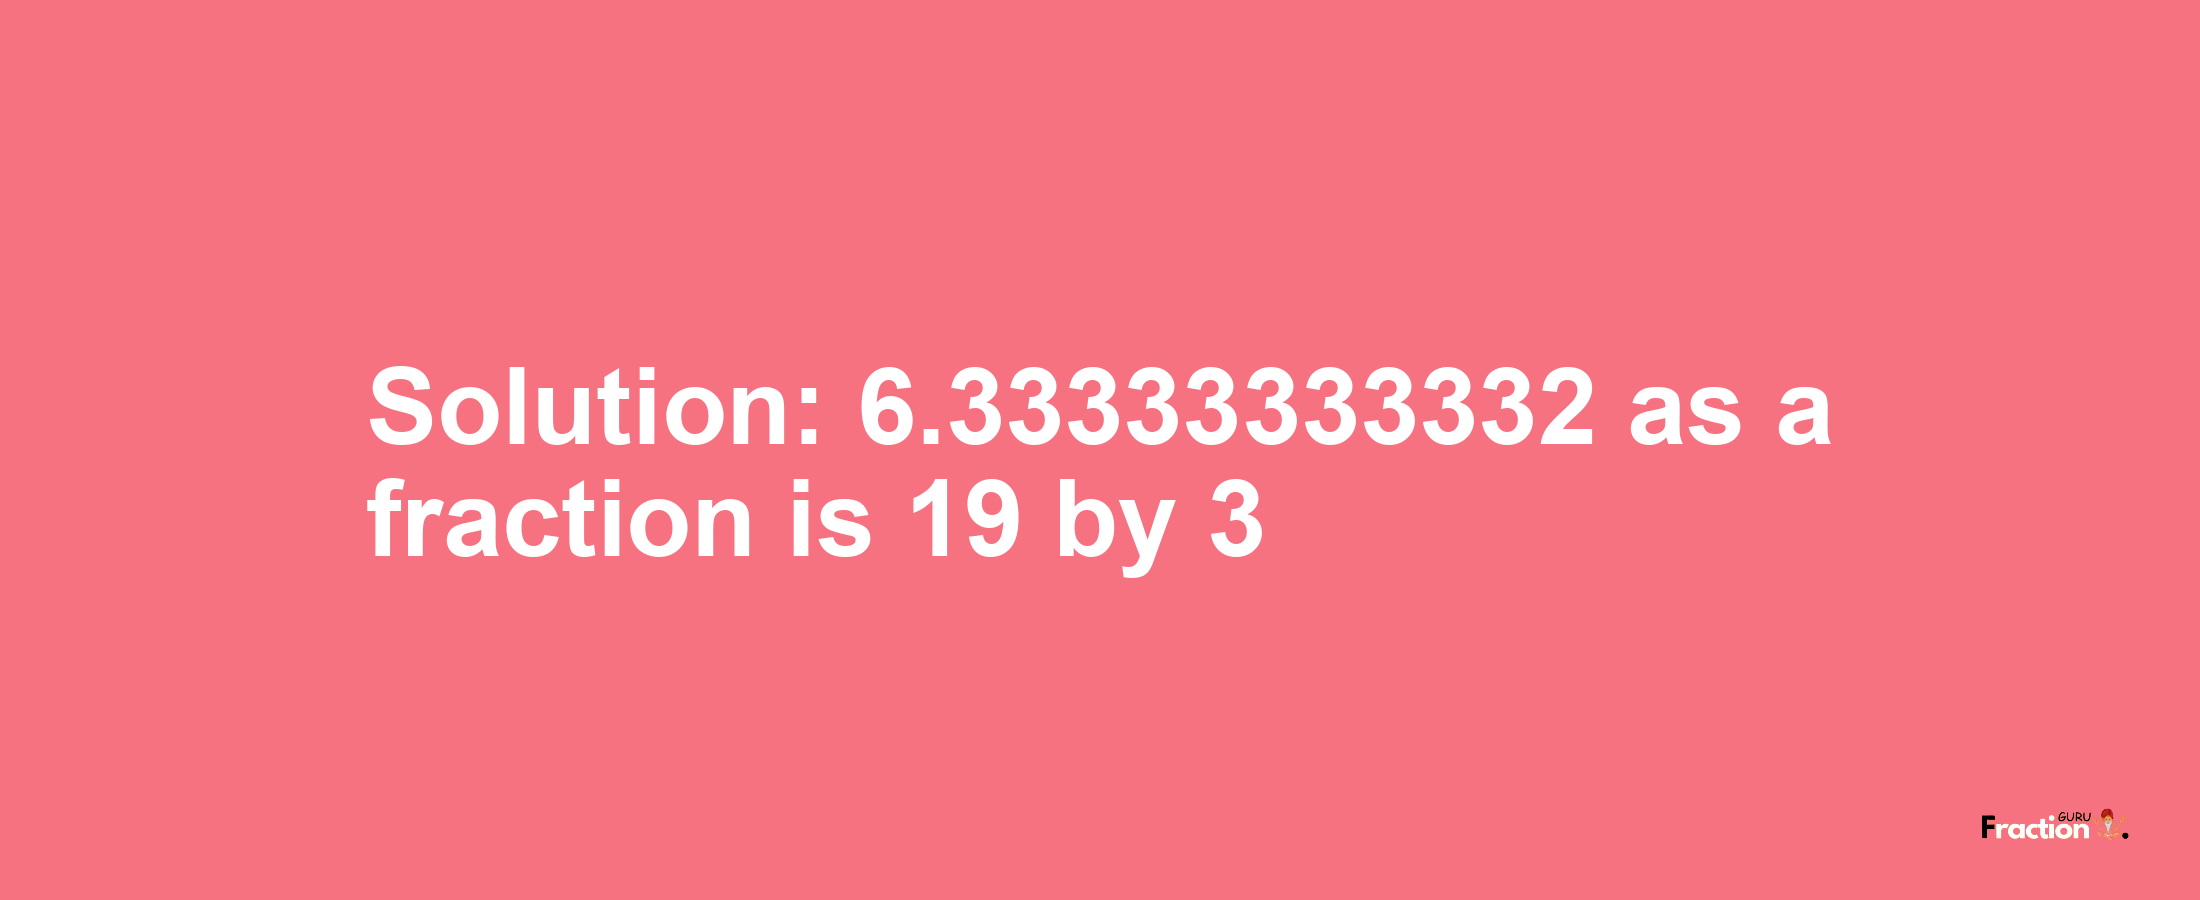 Solution:6.33333333332 as a fraction is 19/3